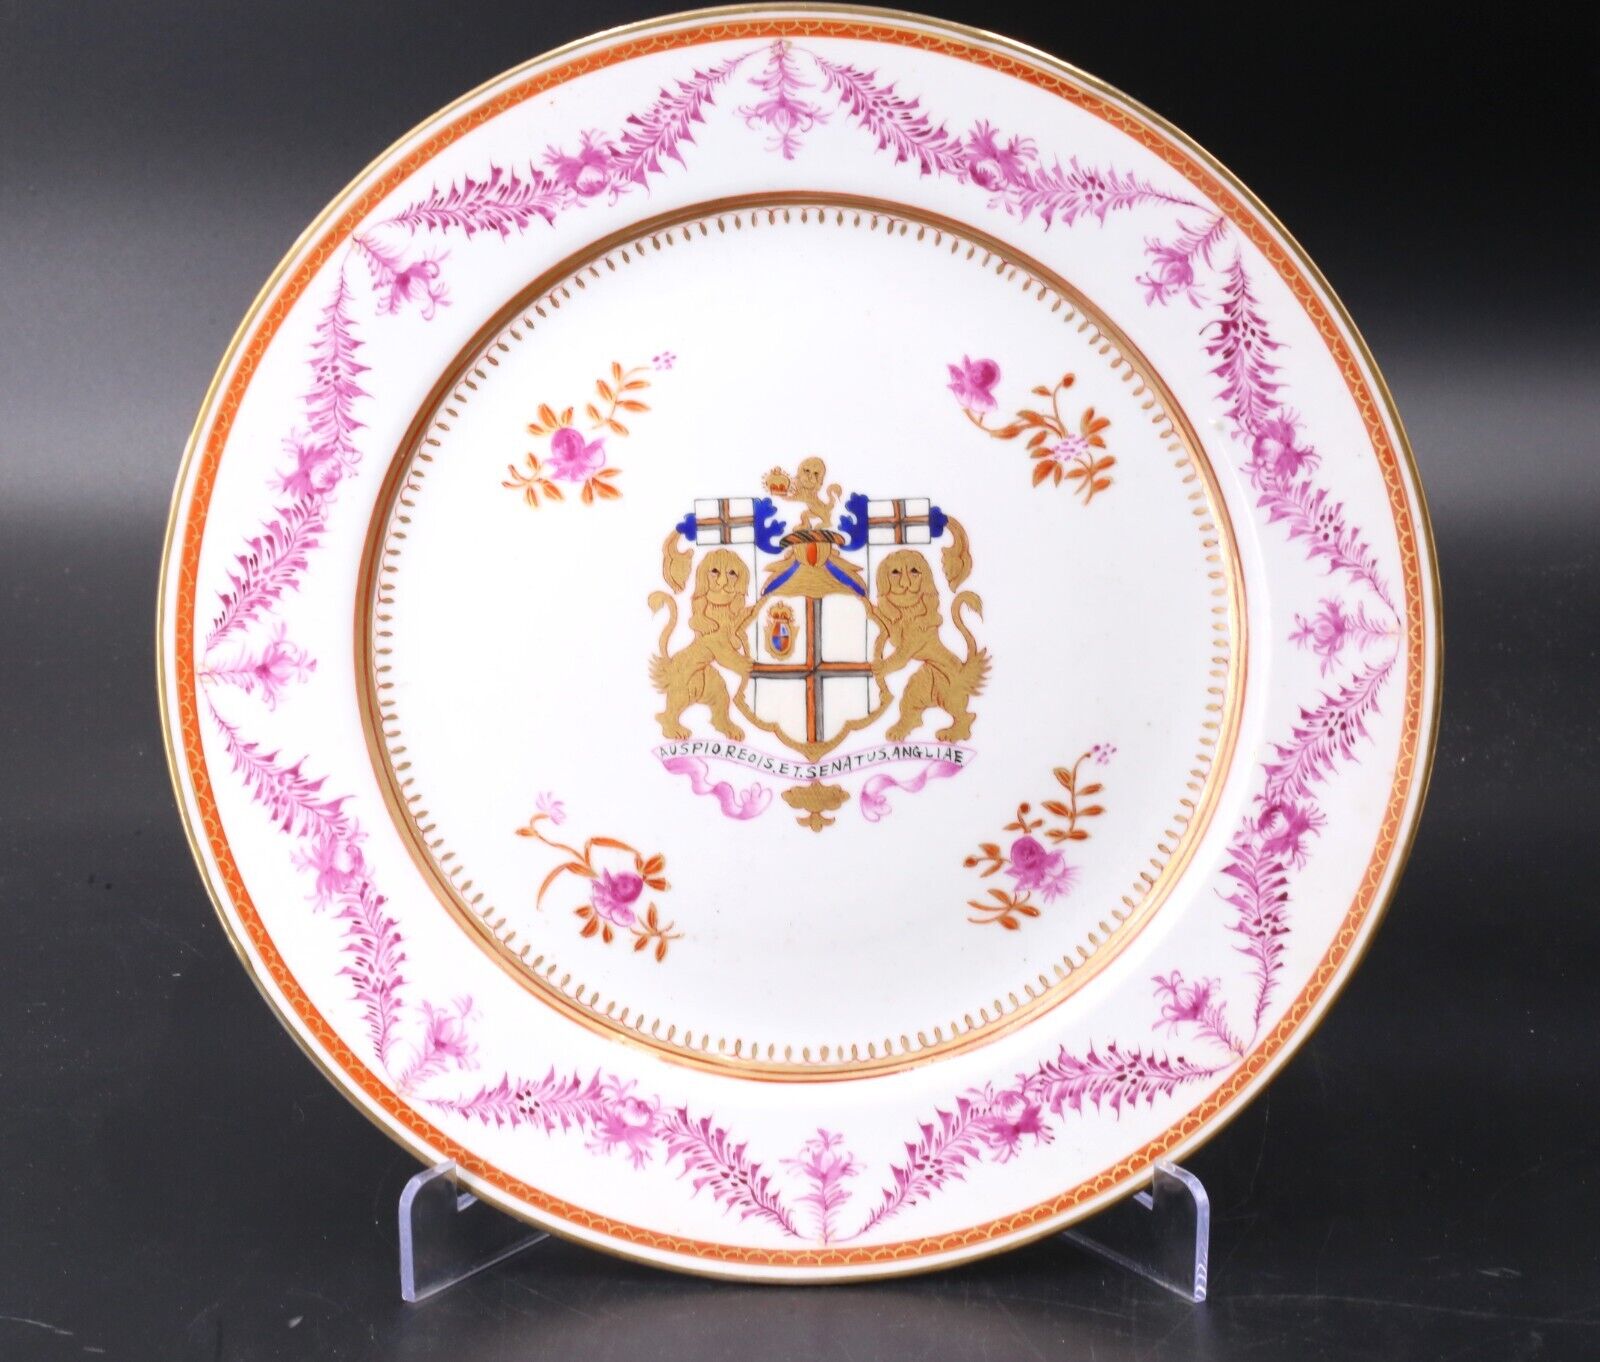 Chinese Export Porcelain Armorial Plate with East India Company Coat-of-Arms